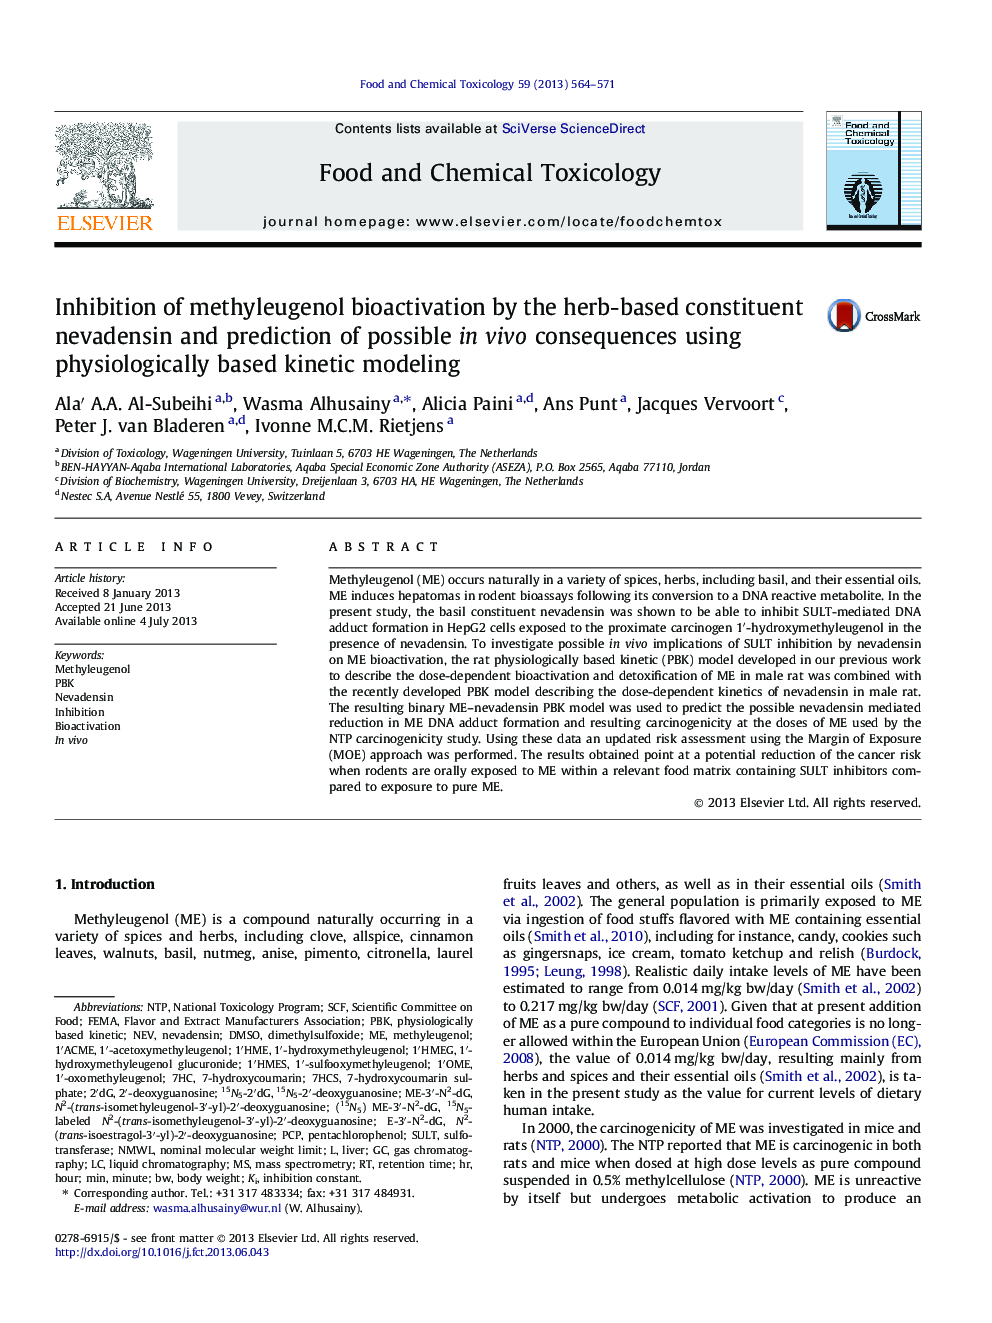 Inhibition of methyleugenol bioactivation by the herb-based constituent nevadensin and prediction of possible in vivo consequences using physiologically based kinetic modeling